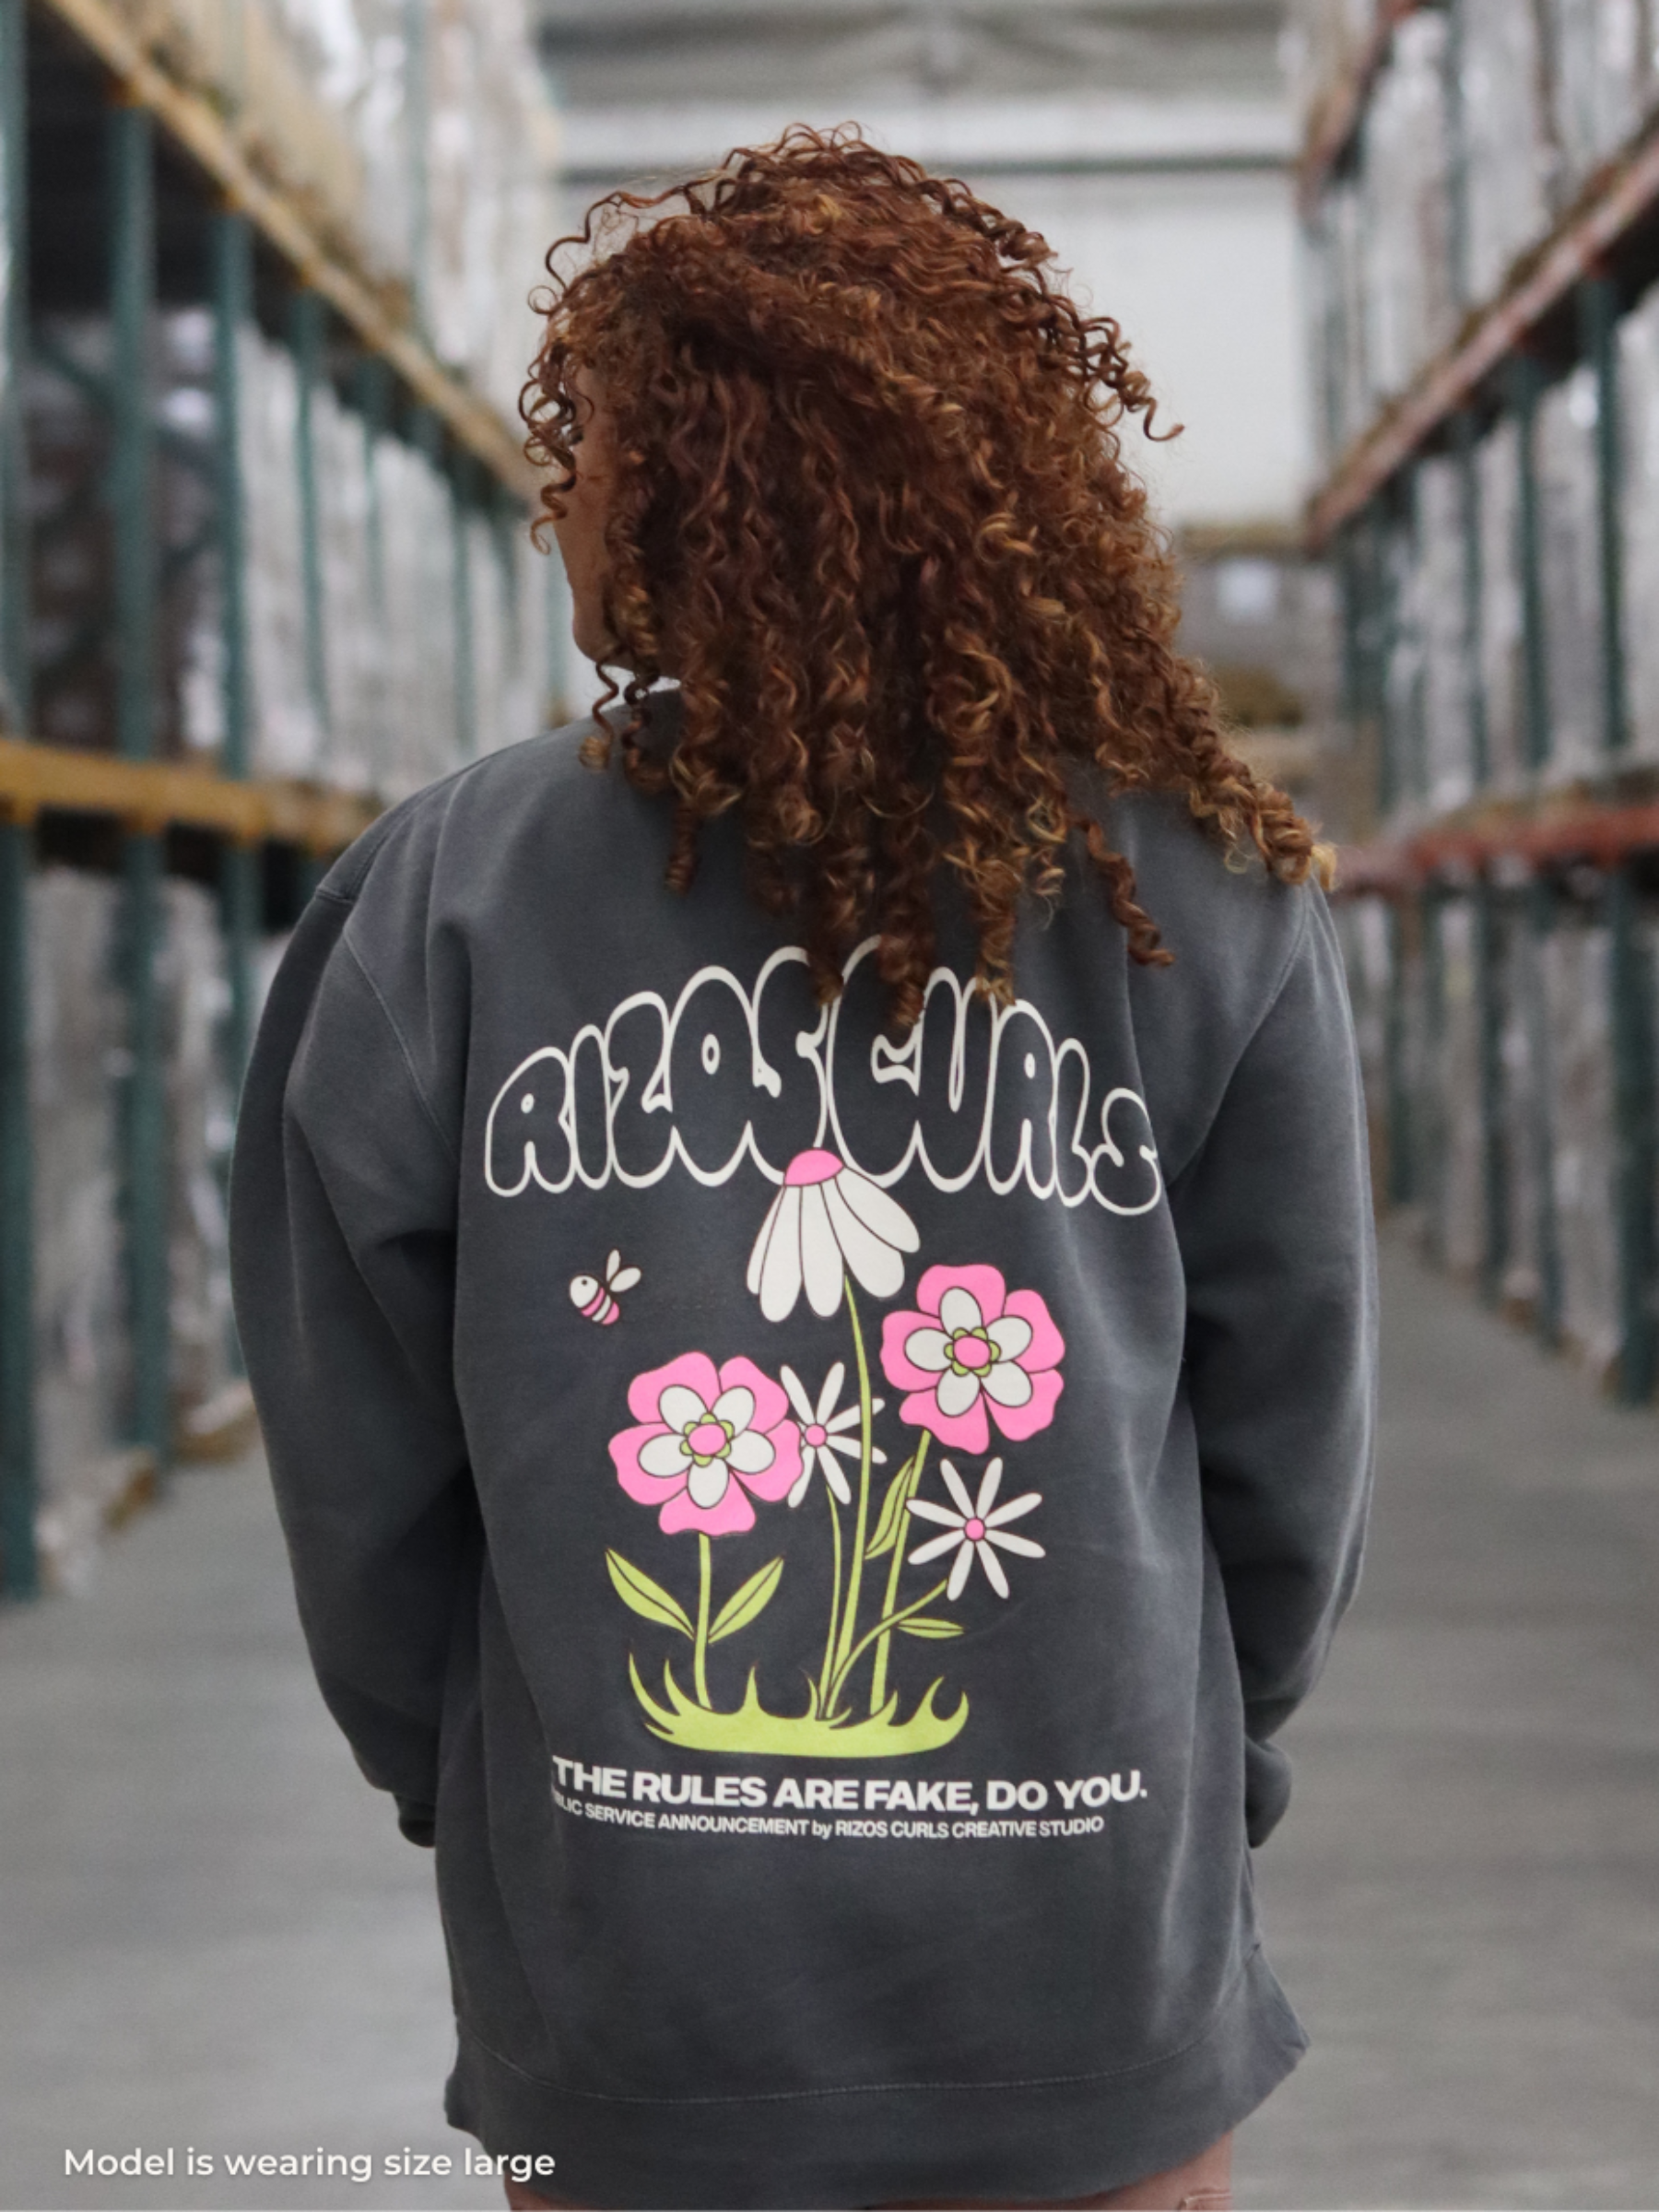 SOLD OUT - Rizos Curls 'Unapologetically You' Crewneck Pullover